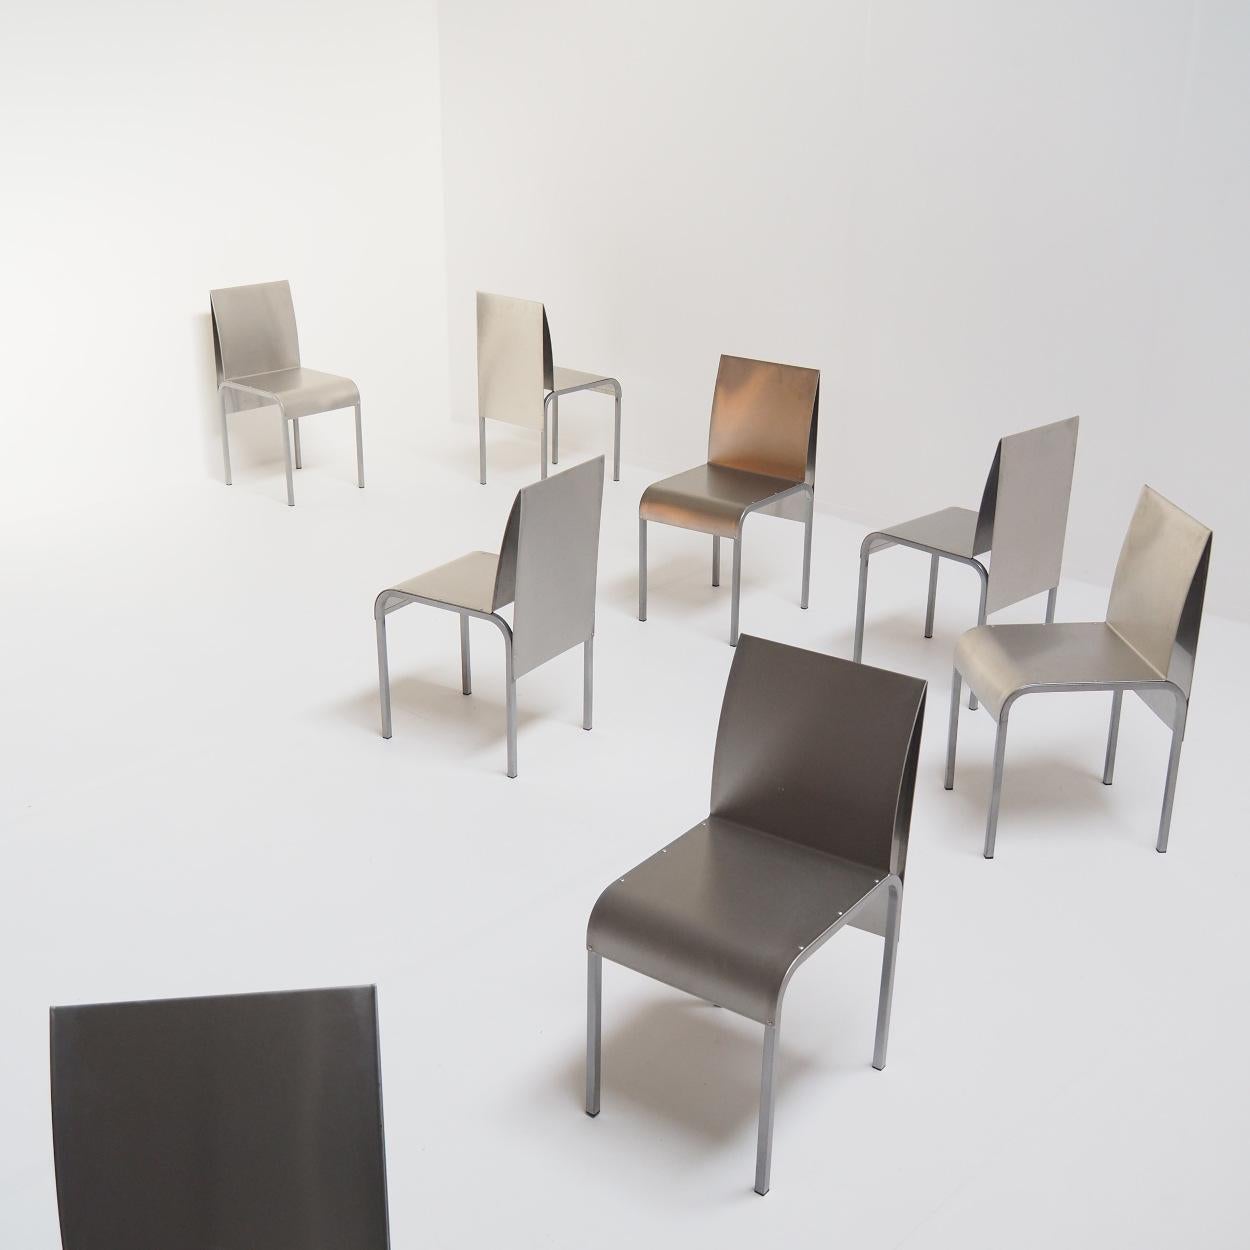 Set of 8 dining room chairs made from one folded aluminum sheet. The legs are in metal. The chairs are made in Belgium, but the designer and manufacturer are unfortunately unknown.

The chairs are in good condition with some light signs of wear